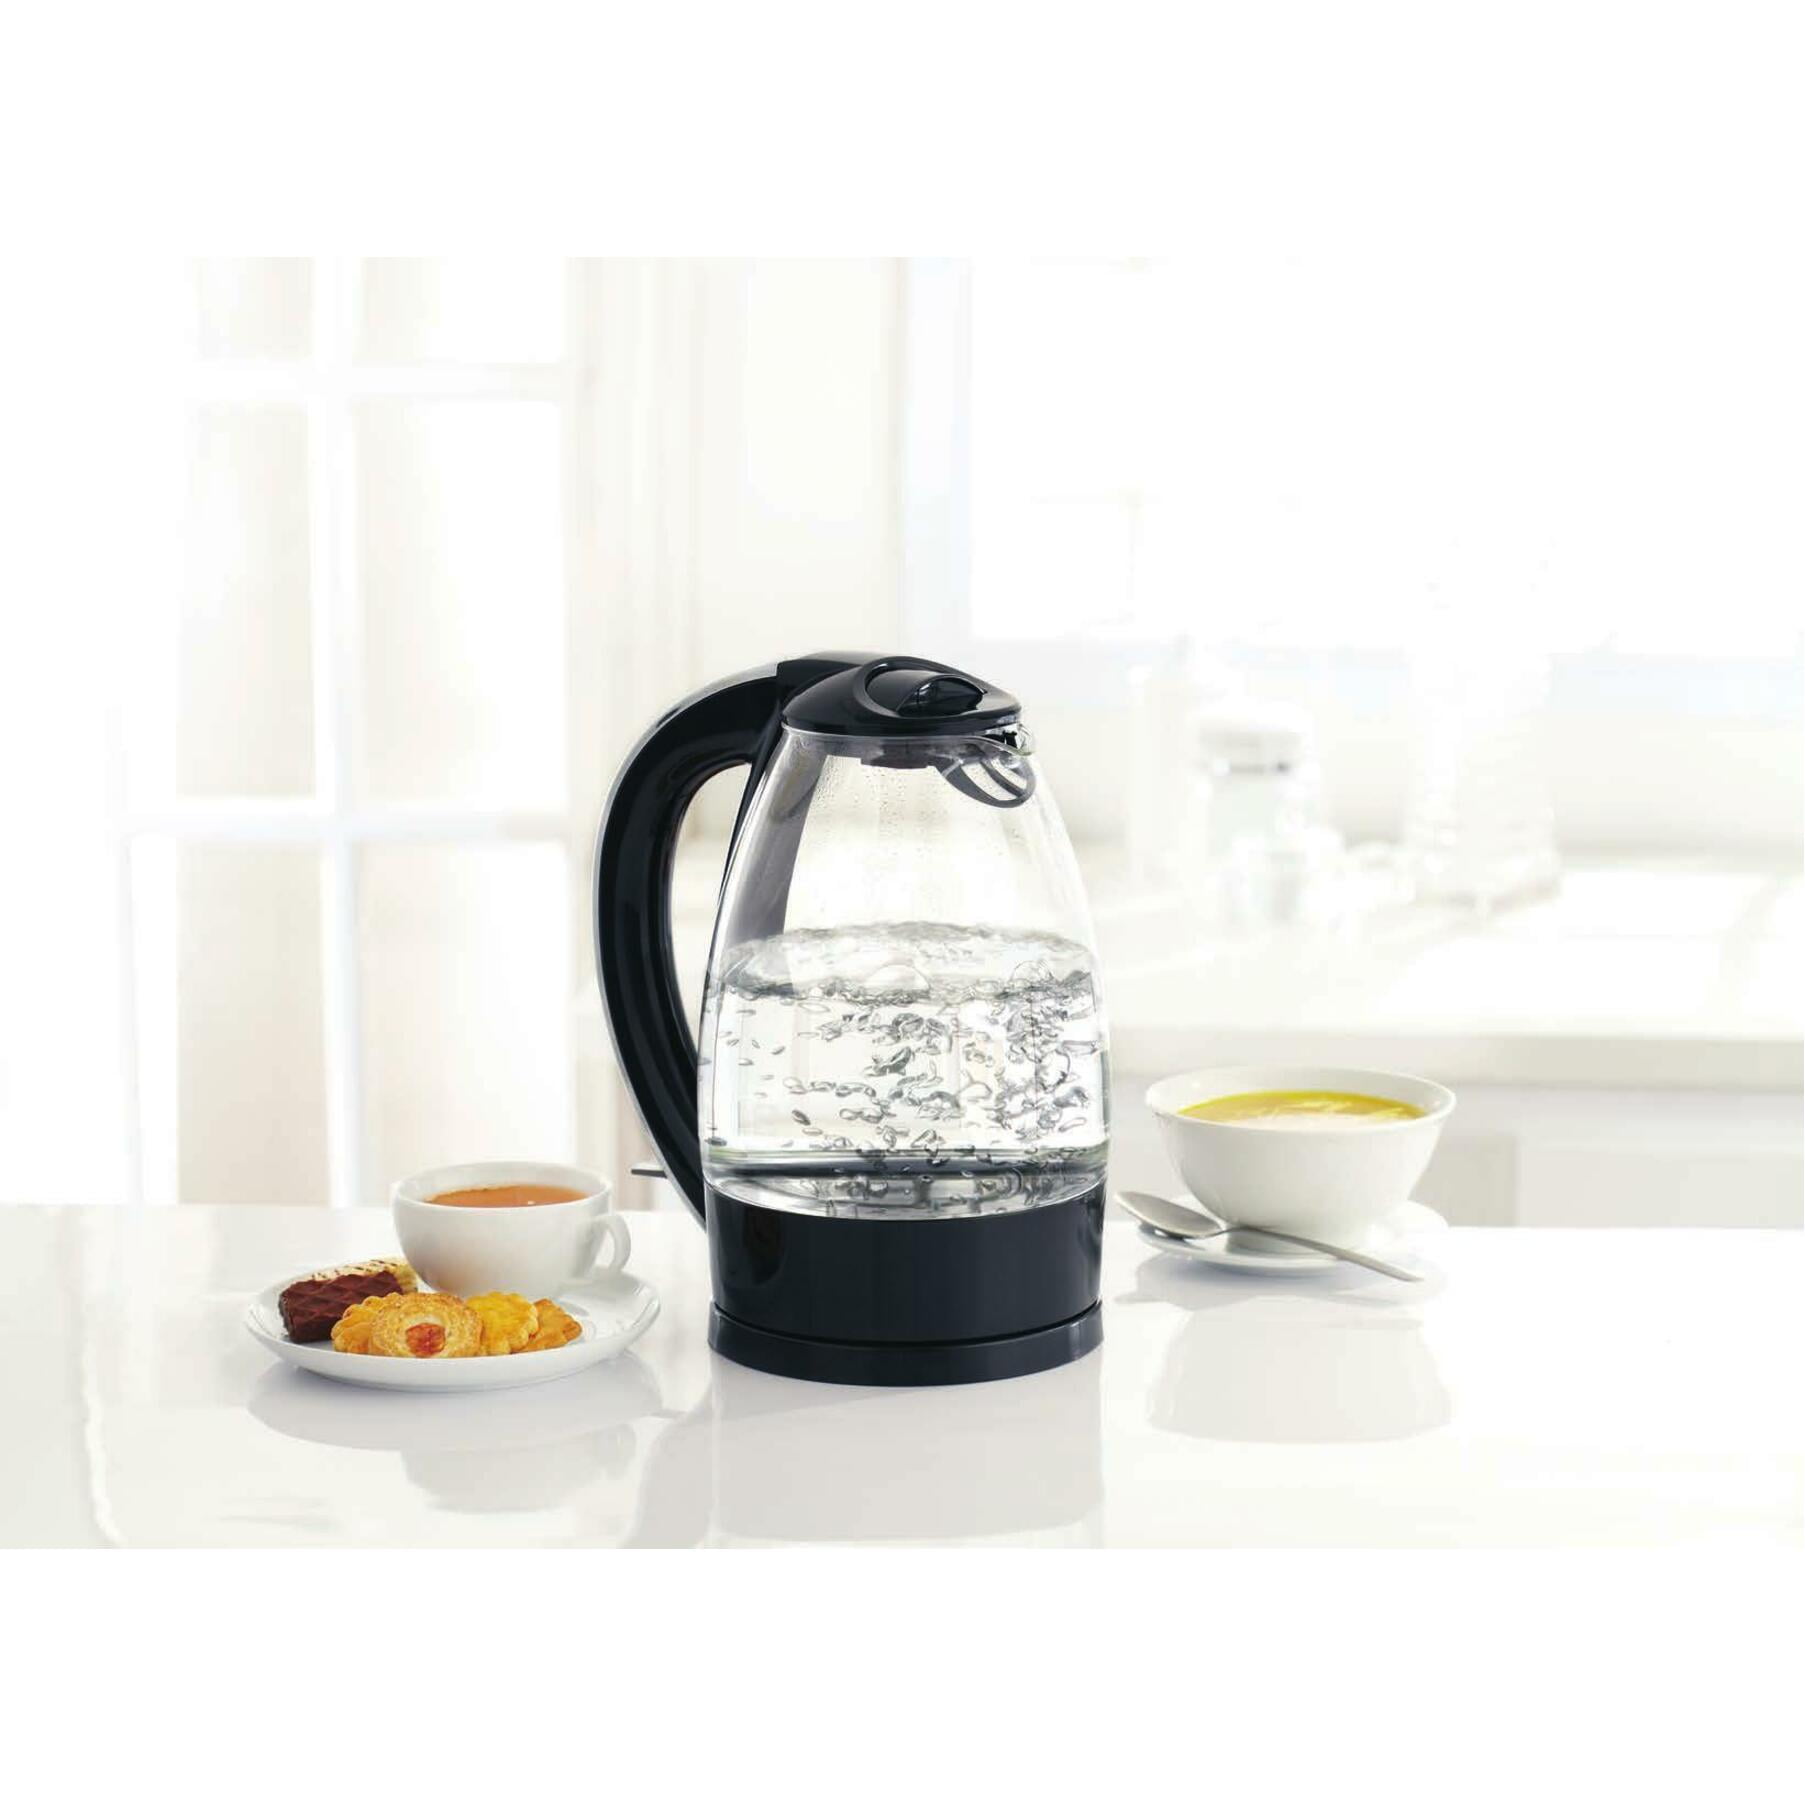 BELLA 1.7 Liter Glass Electric Kettle, Quickly Boil 7 Cups of Water in 6-7  Minutes, Black & 2 Slice Toaster, Quick & Even Results Every Time